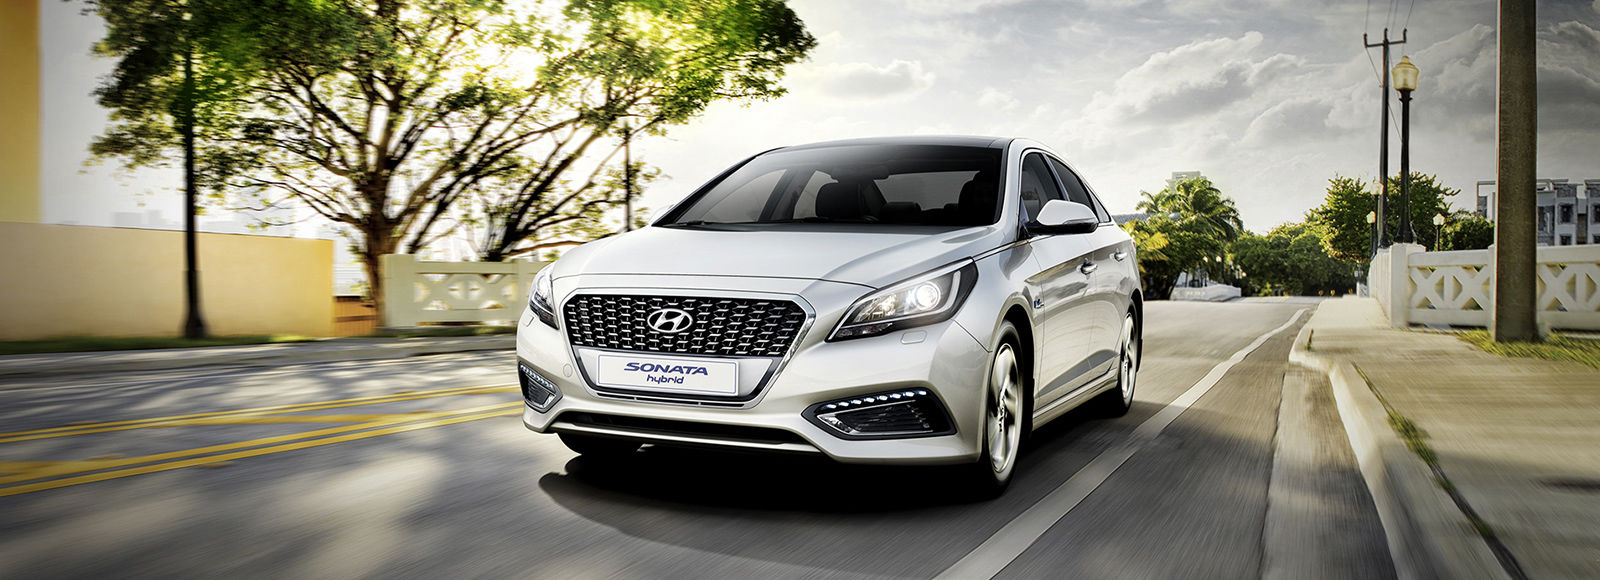 Front view of silver Sonata Hybrid driving on the road